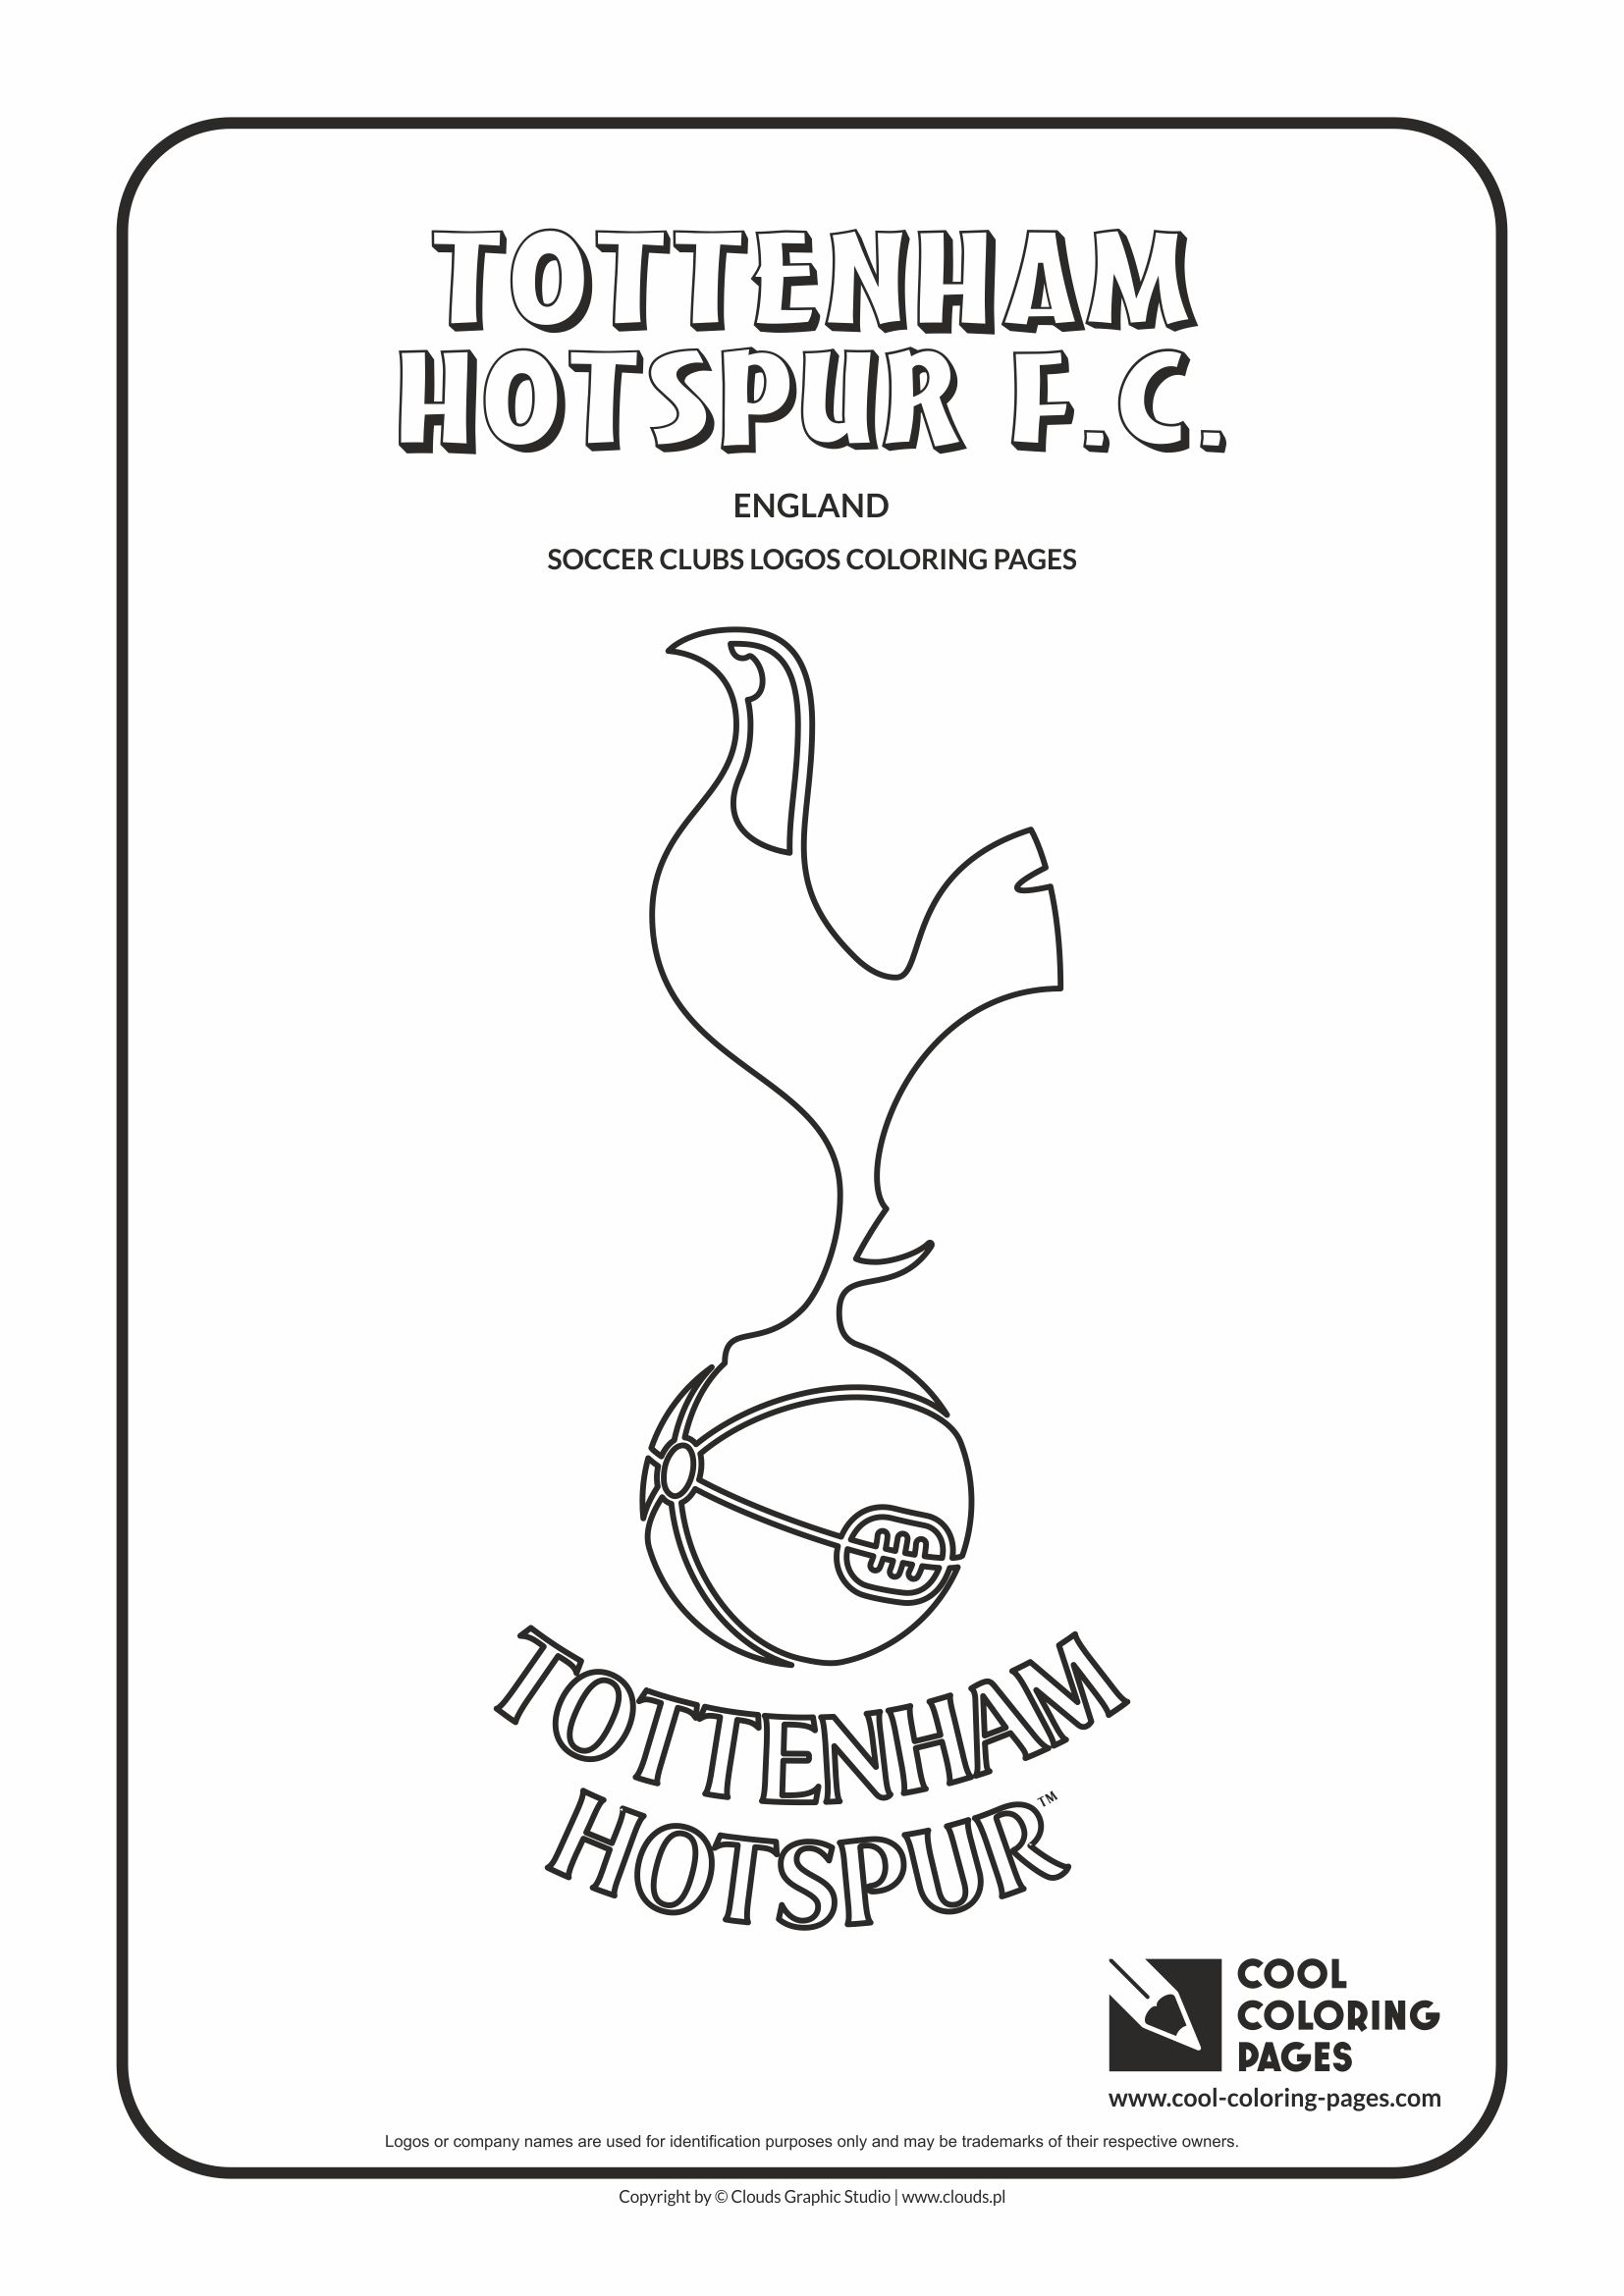 Cool coloring pages tottenham hotspur fc logo coloring page